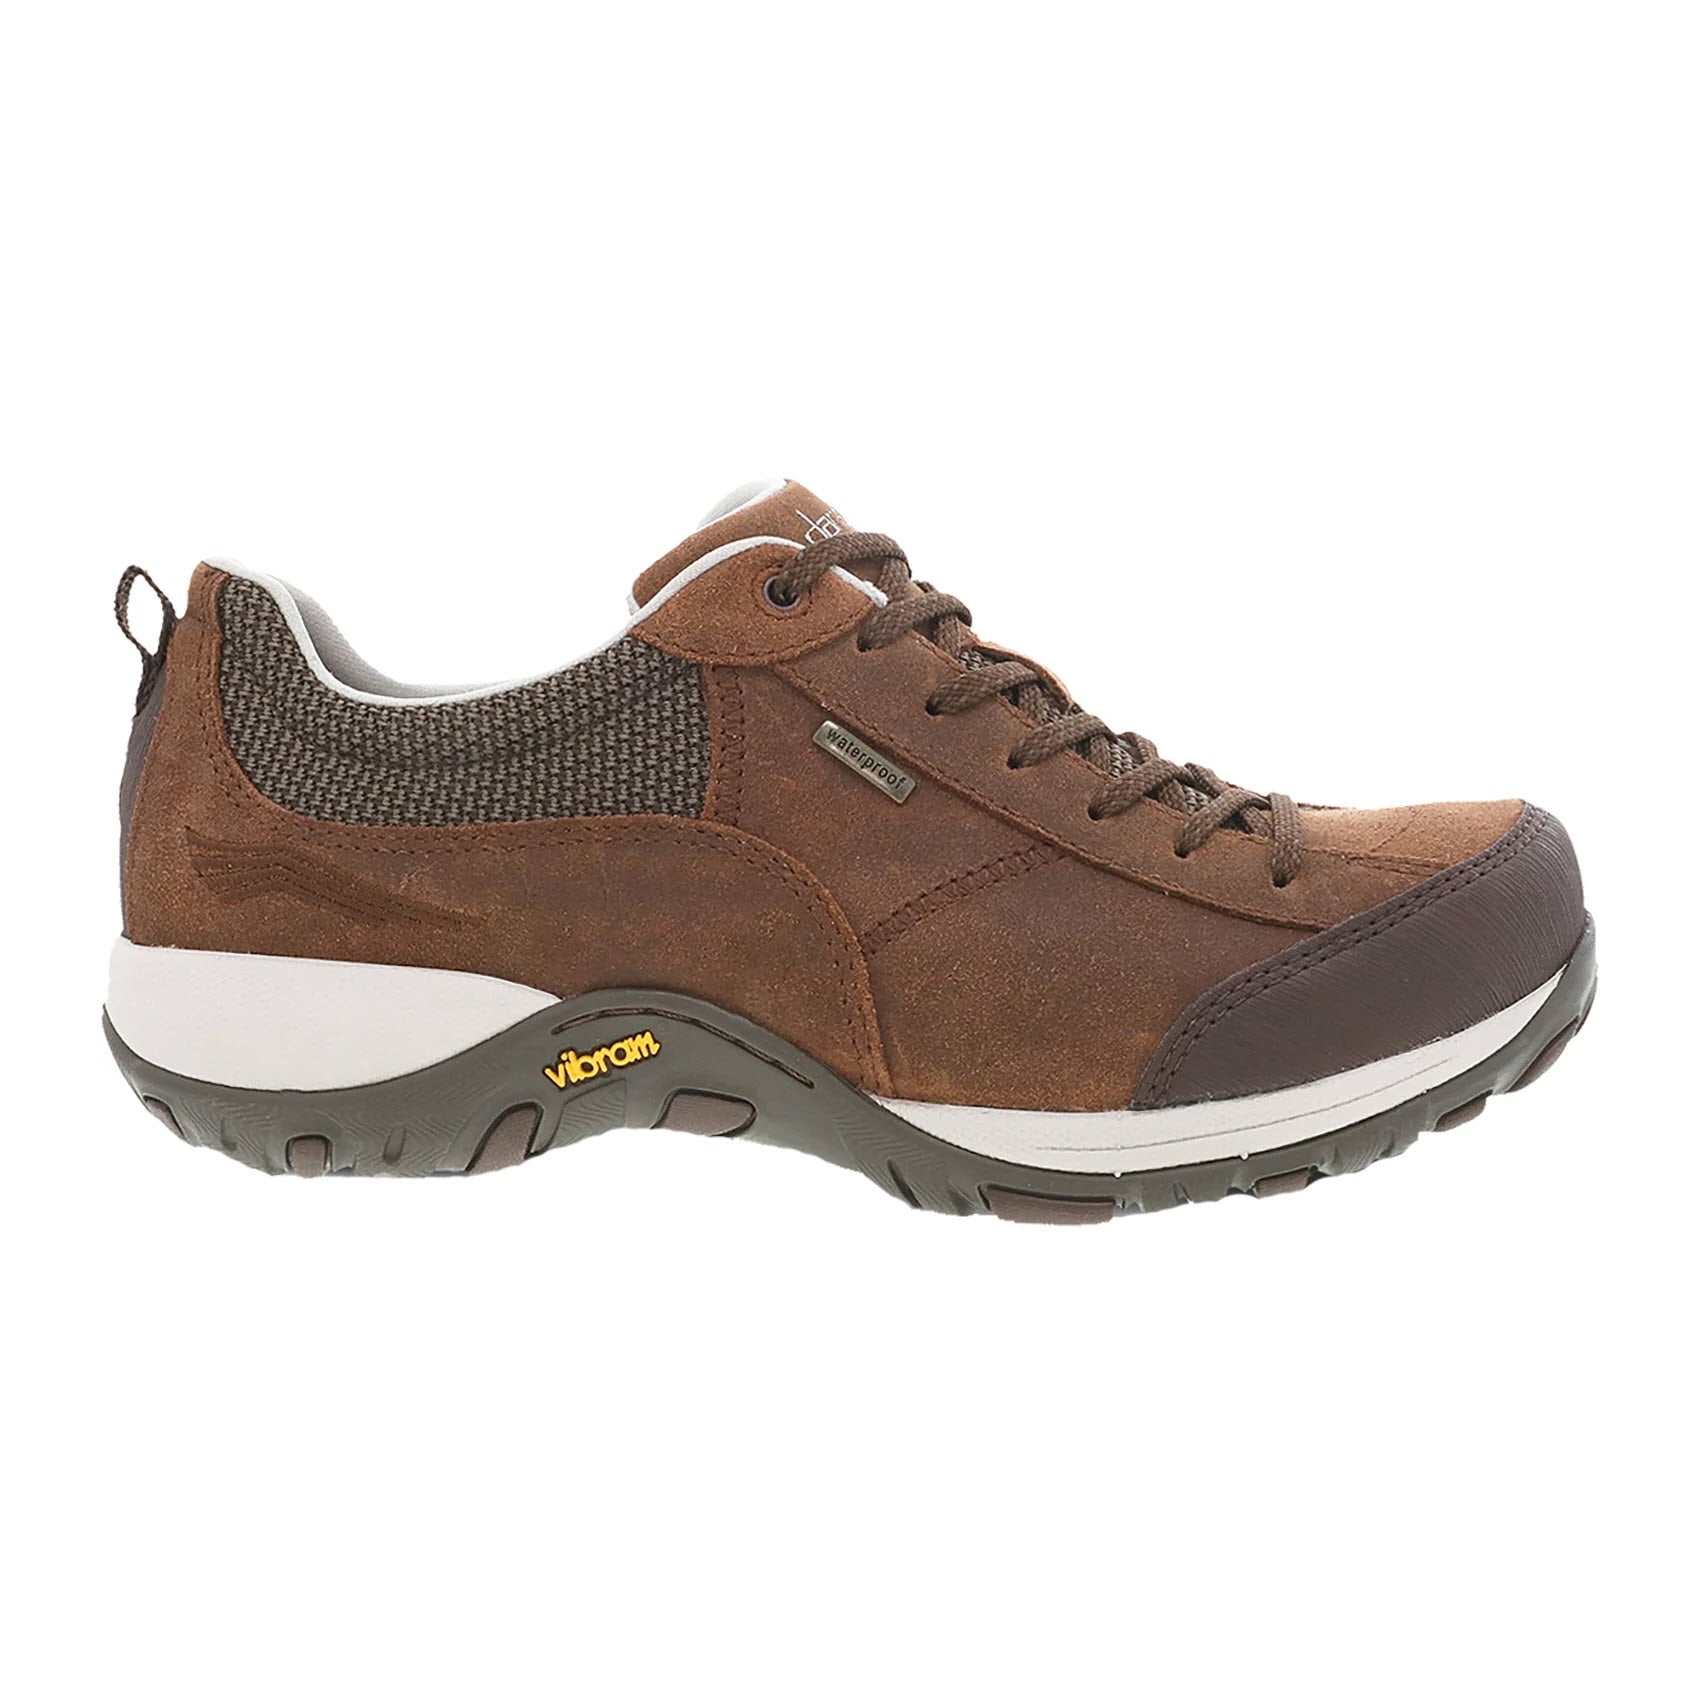 Dansko Paisley brown burnished hiking shoe with mesh panels and a white sole, featuring a slip-resistant Vibram rubber outsole.